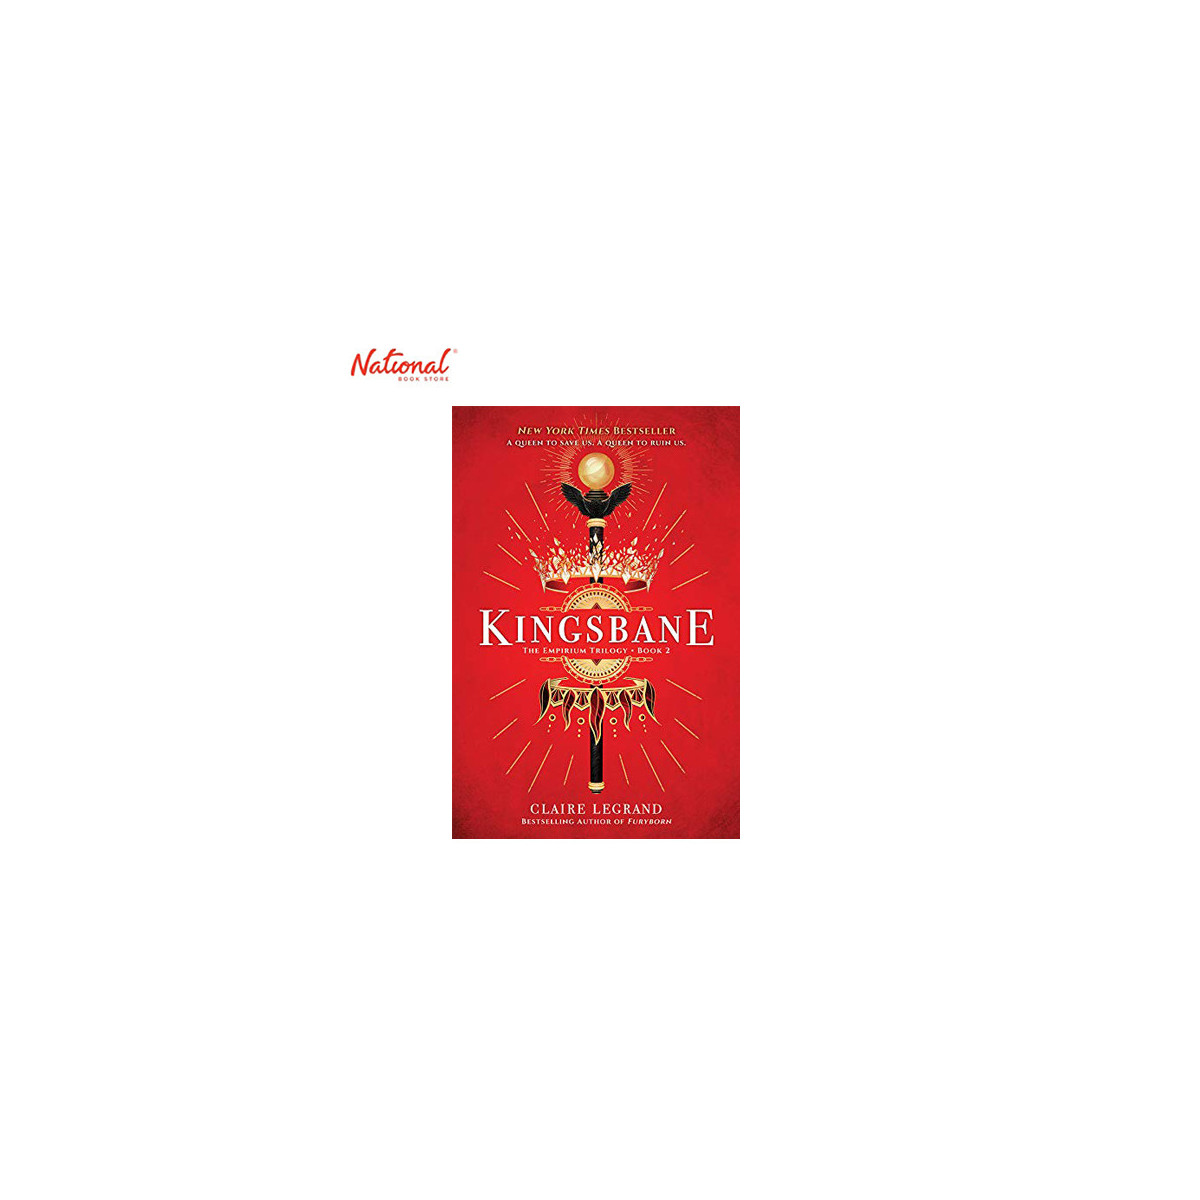 Kingsbane (The Empirium Trilogy Book 2) Trade Paperback by Claire Legrand